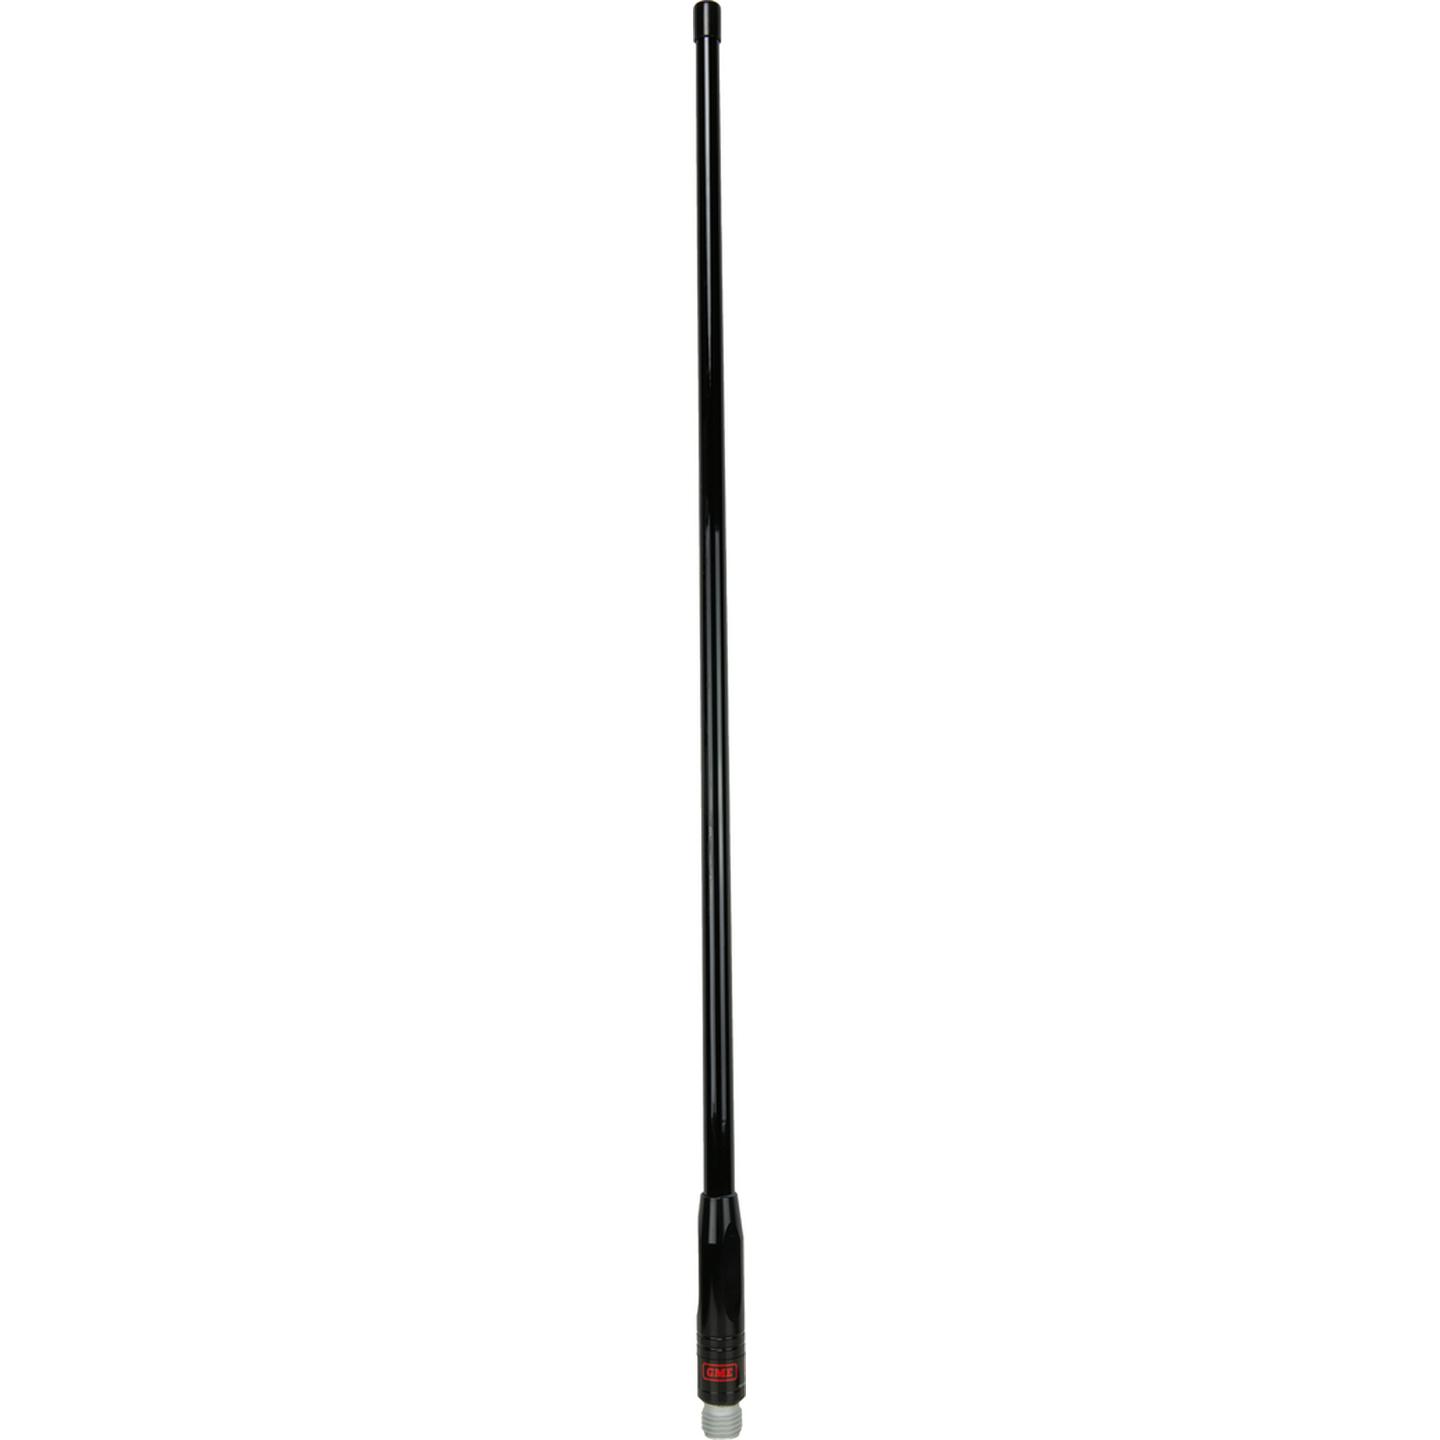 GME Antenna Whip - Suit AE4705 - Black